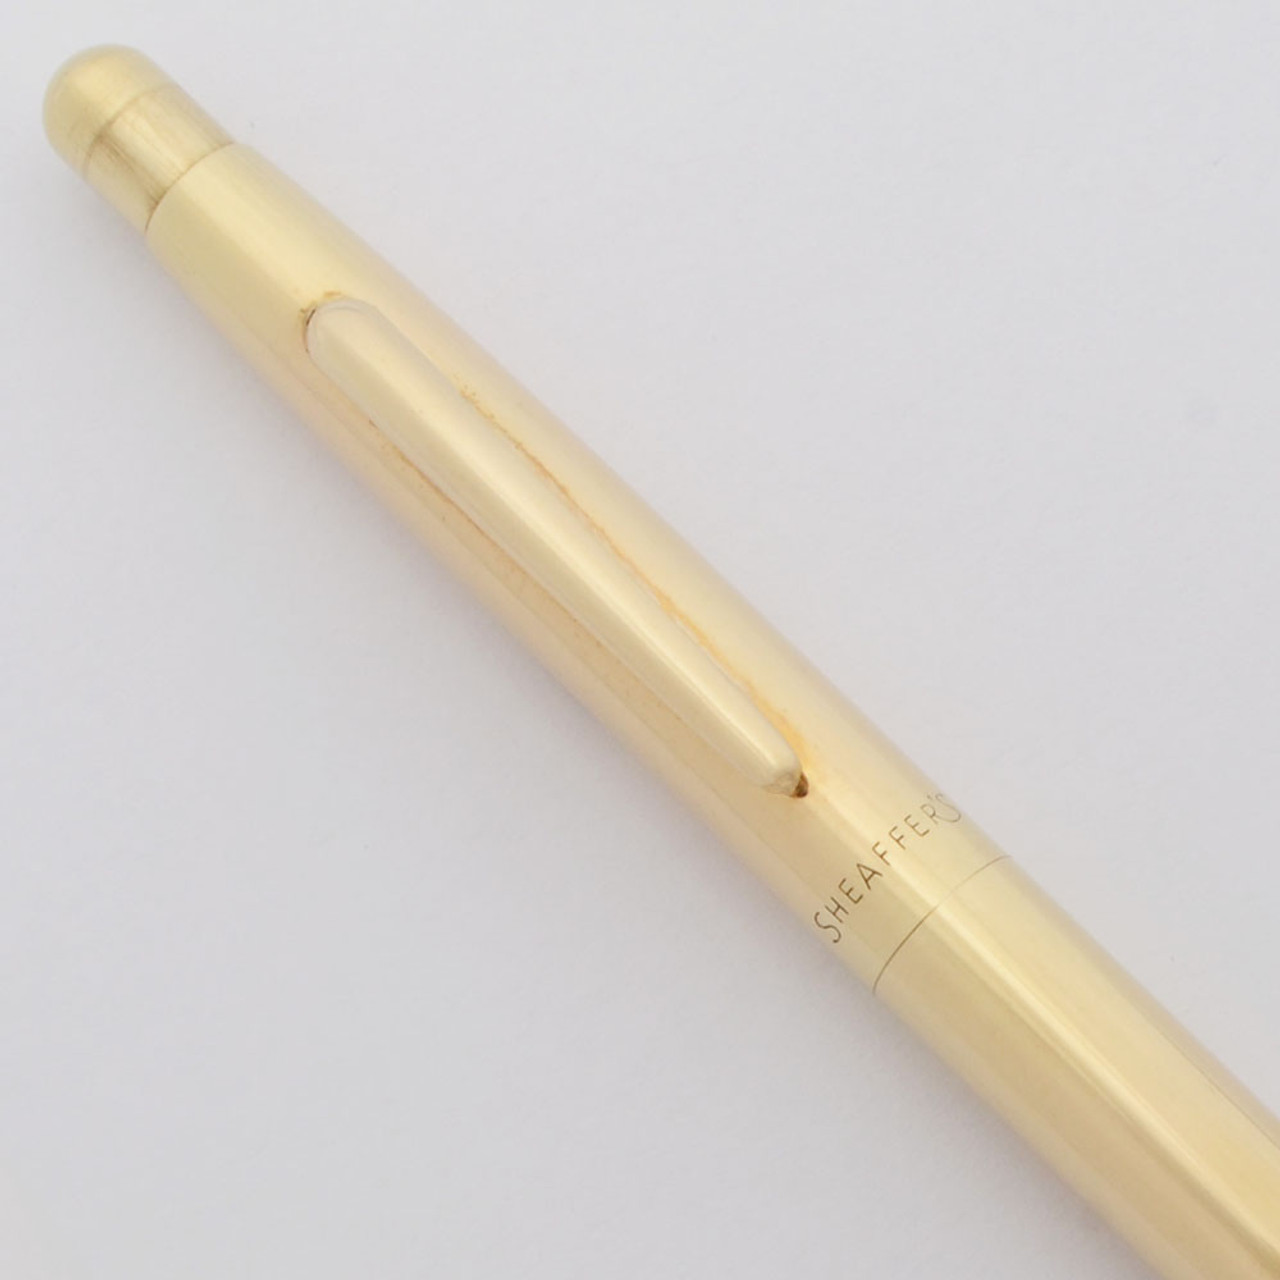 Sheaffer Stratowriter Ballpoint  (1946) - Gold Filled, Adapted for Modern Refills  (Excellent, Works Well)